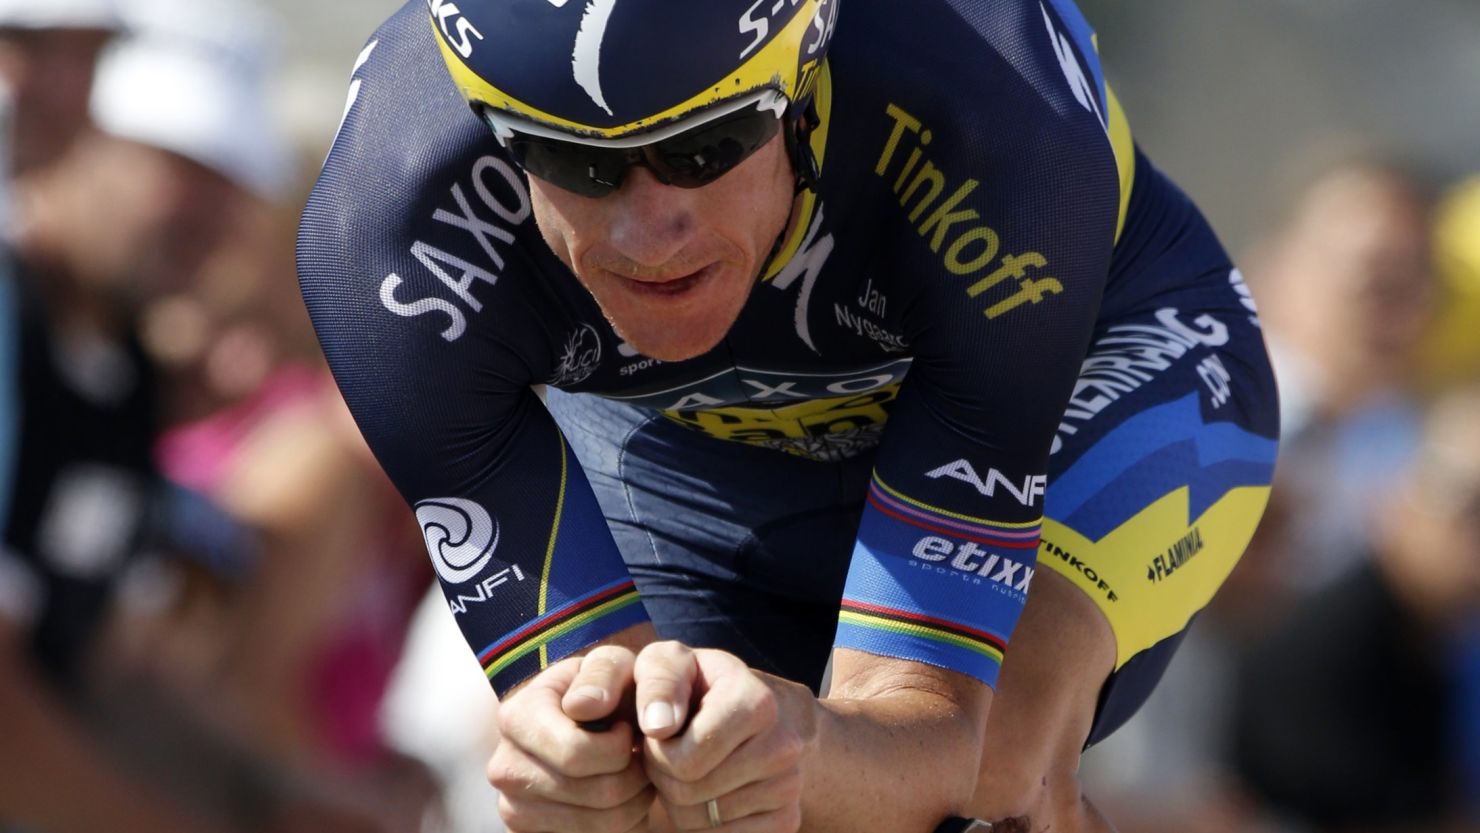 Saxo-Tinkoff rider Michael Rogers is a three-time world time trial champion and Olympic bronze medalist.